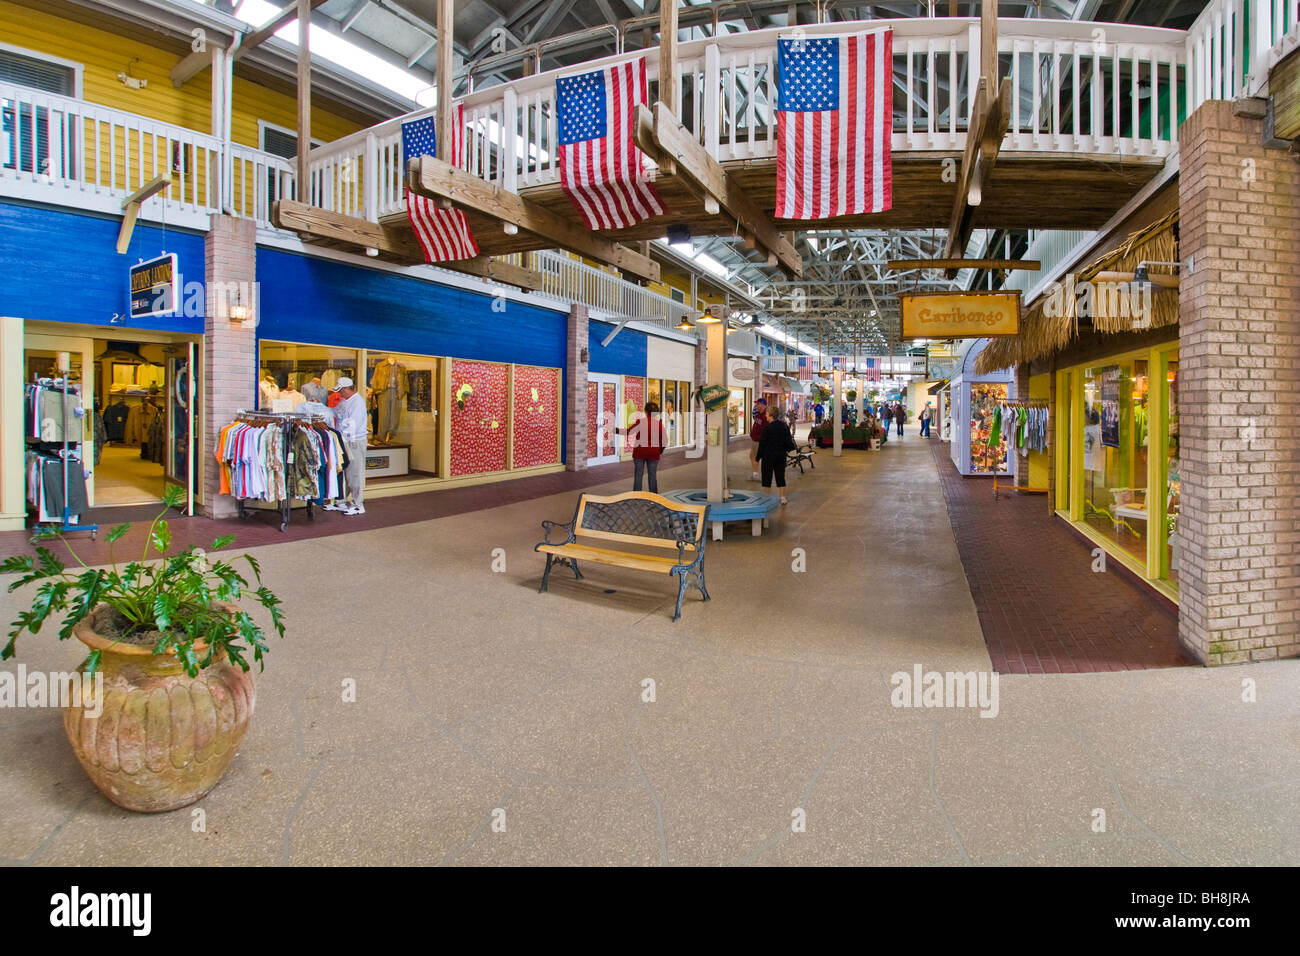 Inside of Fishermens Village shopping and dining complex in Punta Gorda Florida Stock Photo